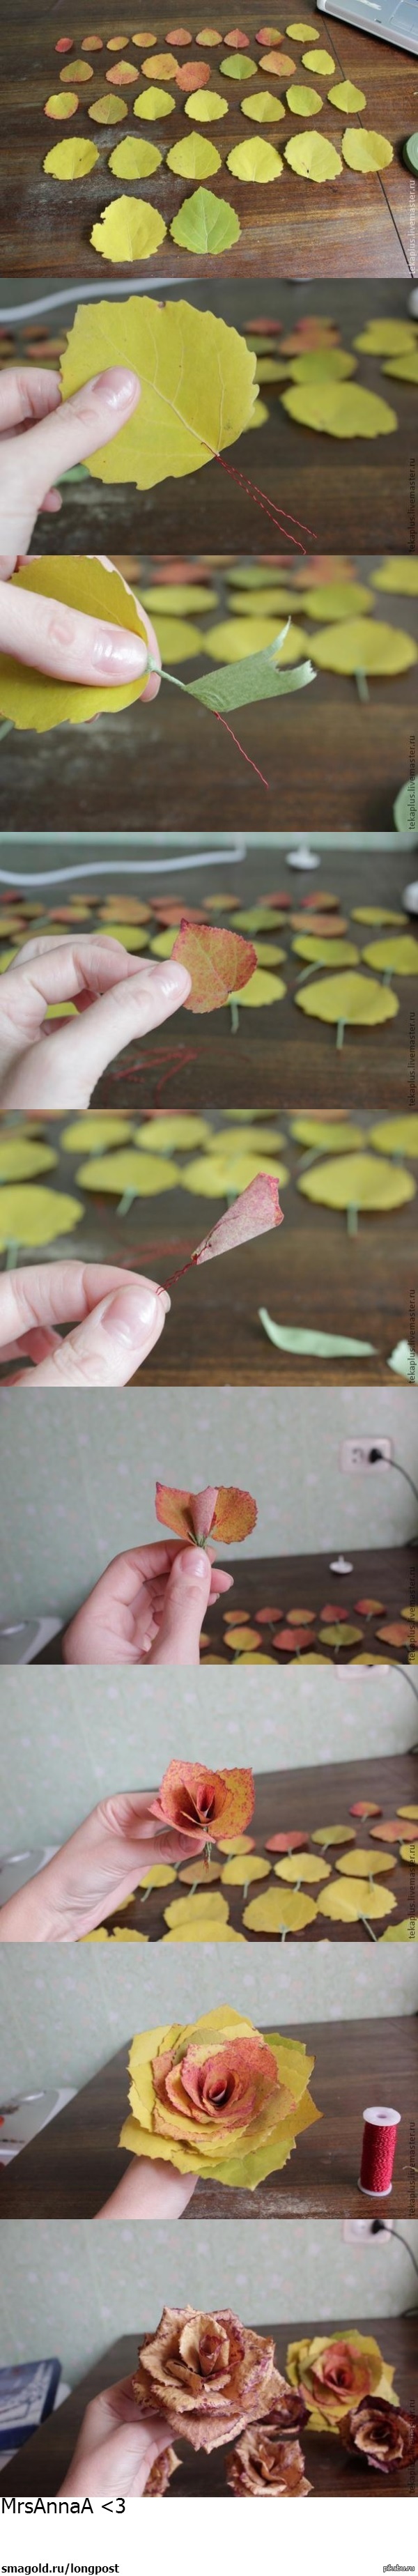 How to make a rose from leaves - Longpost, Crafts, Leaves, the Rose